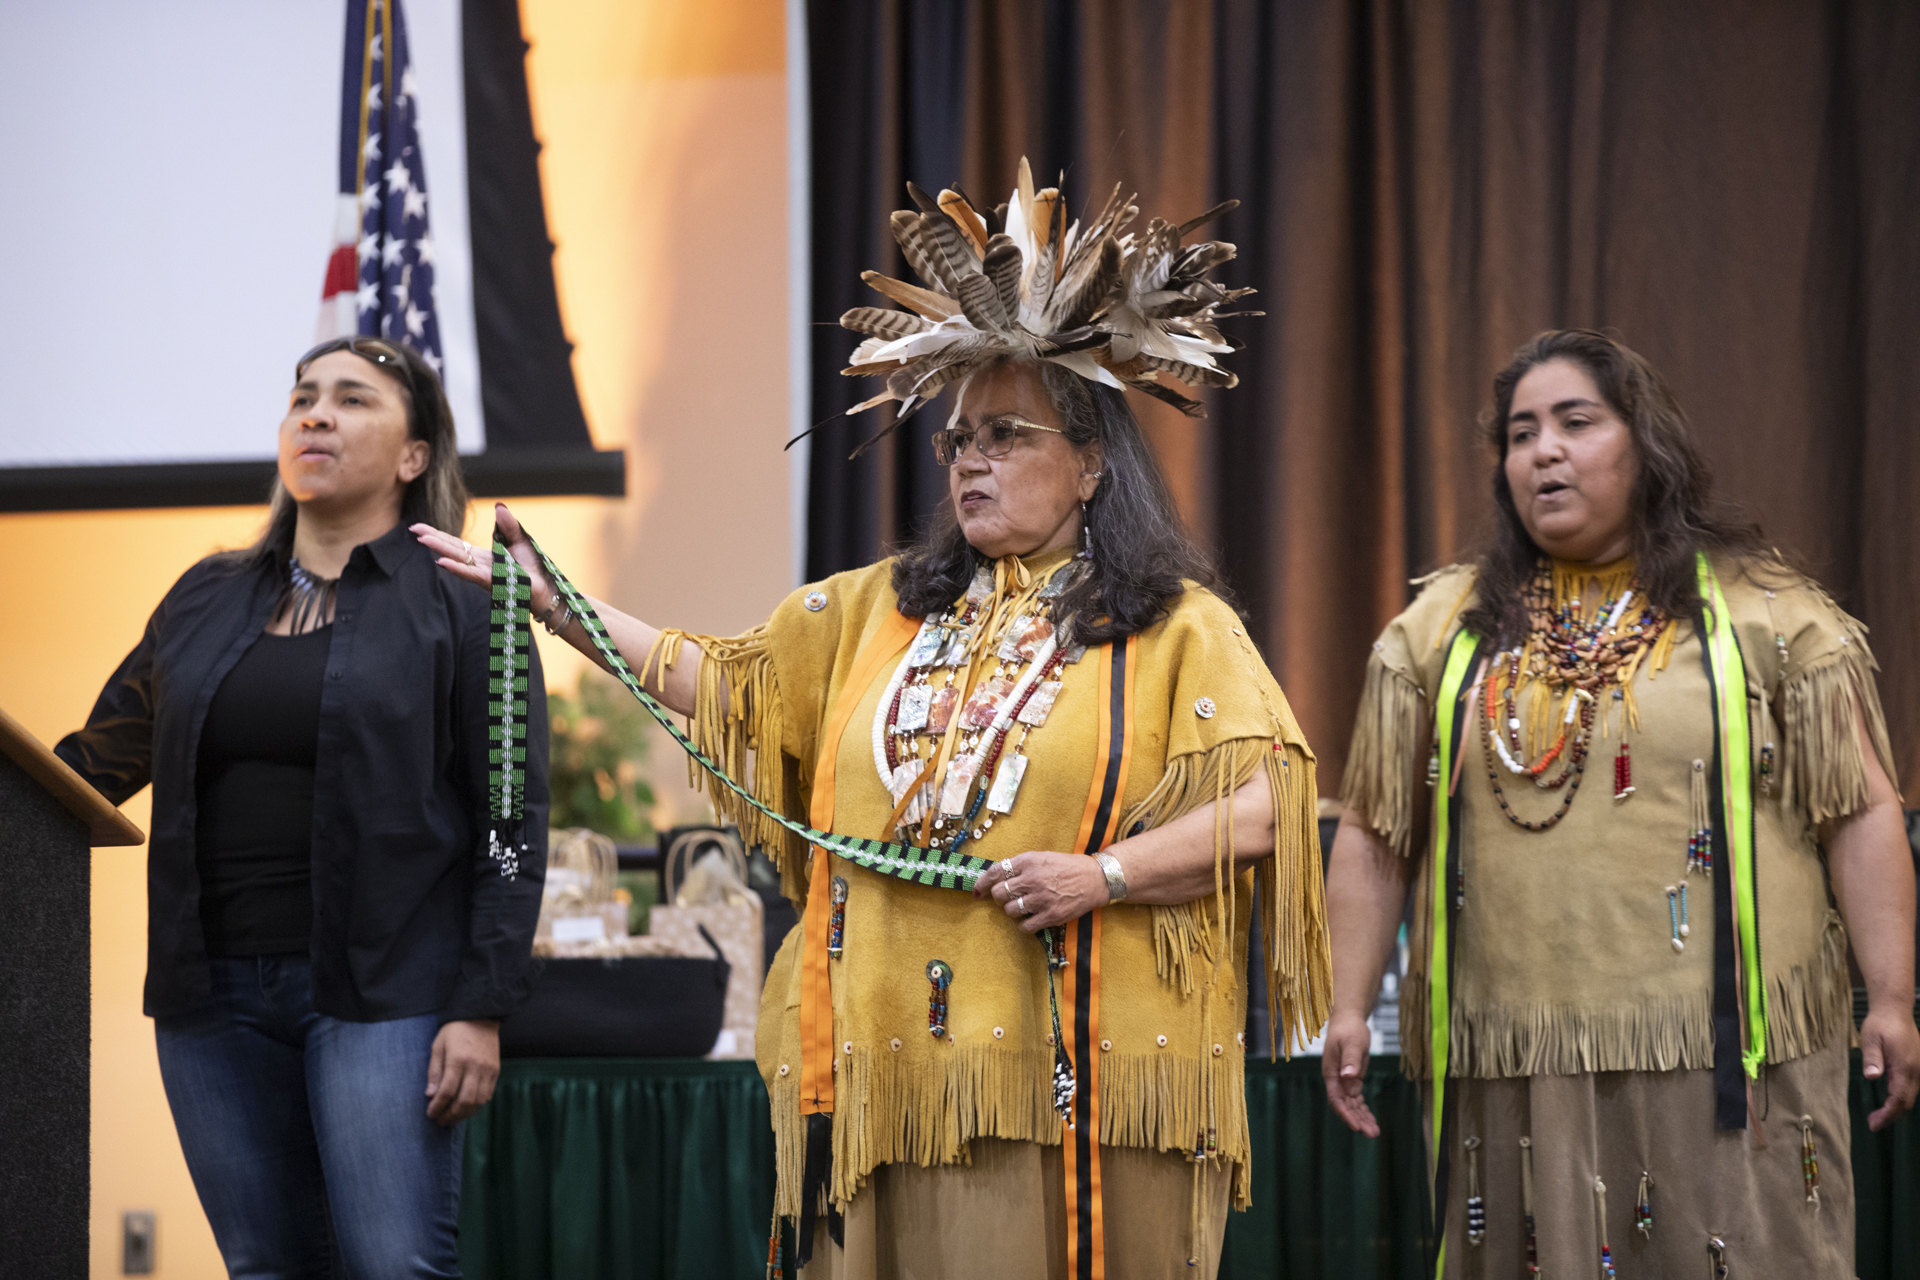 Traditional presentations were part of the opening of Sac State's Esak'tima' Center.